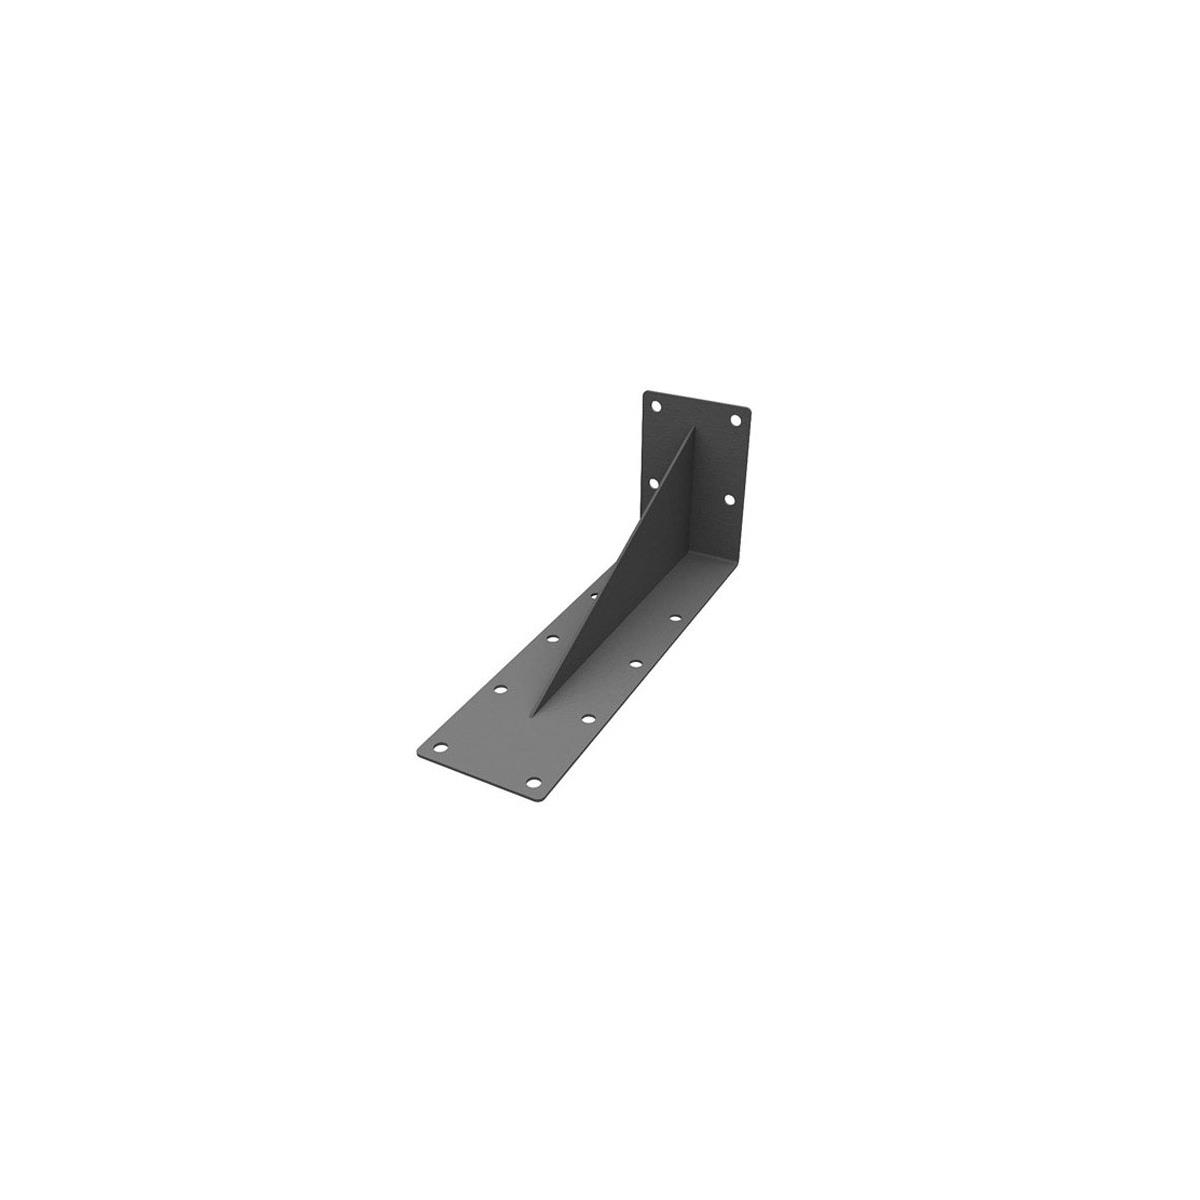 Image of ARRI Universal Wall Bracket for 2 Rails or Pipes